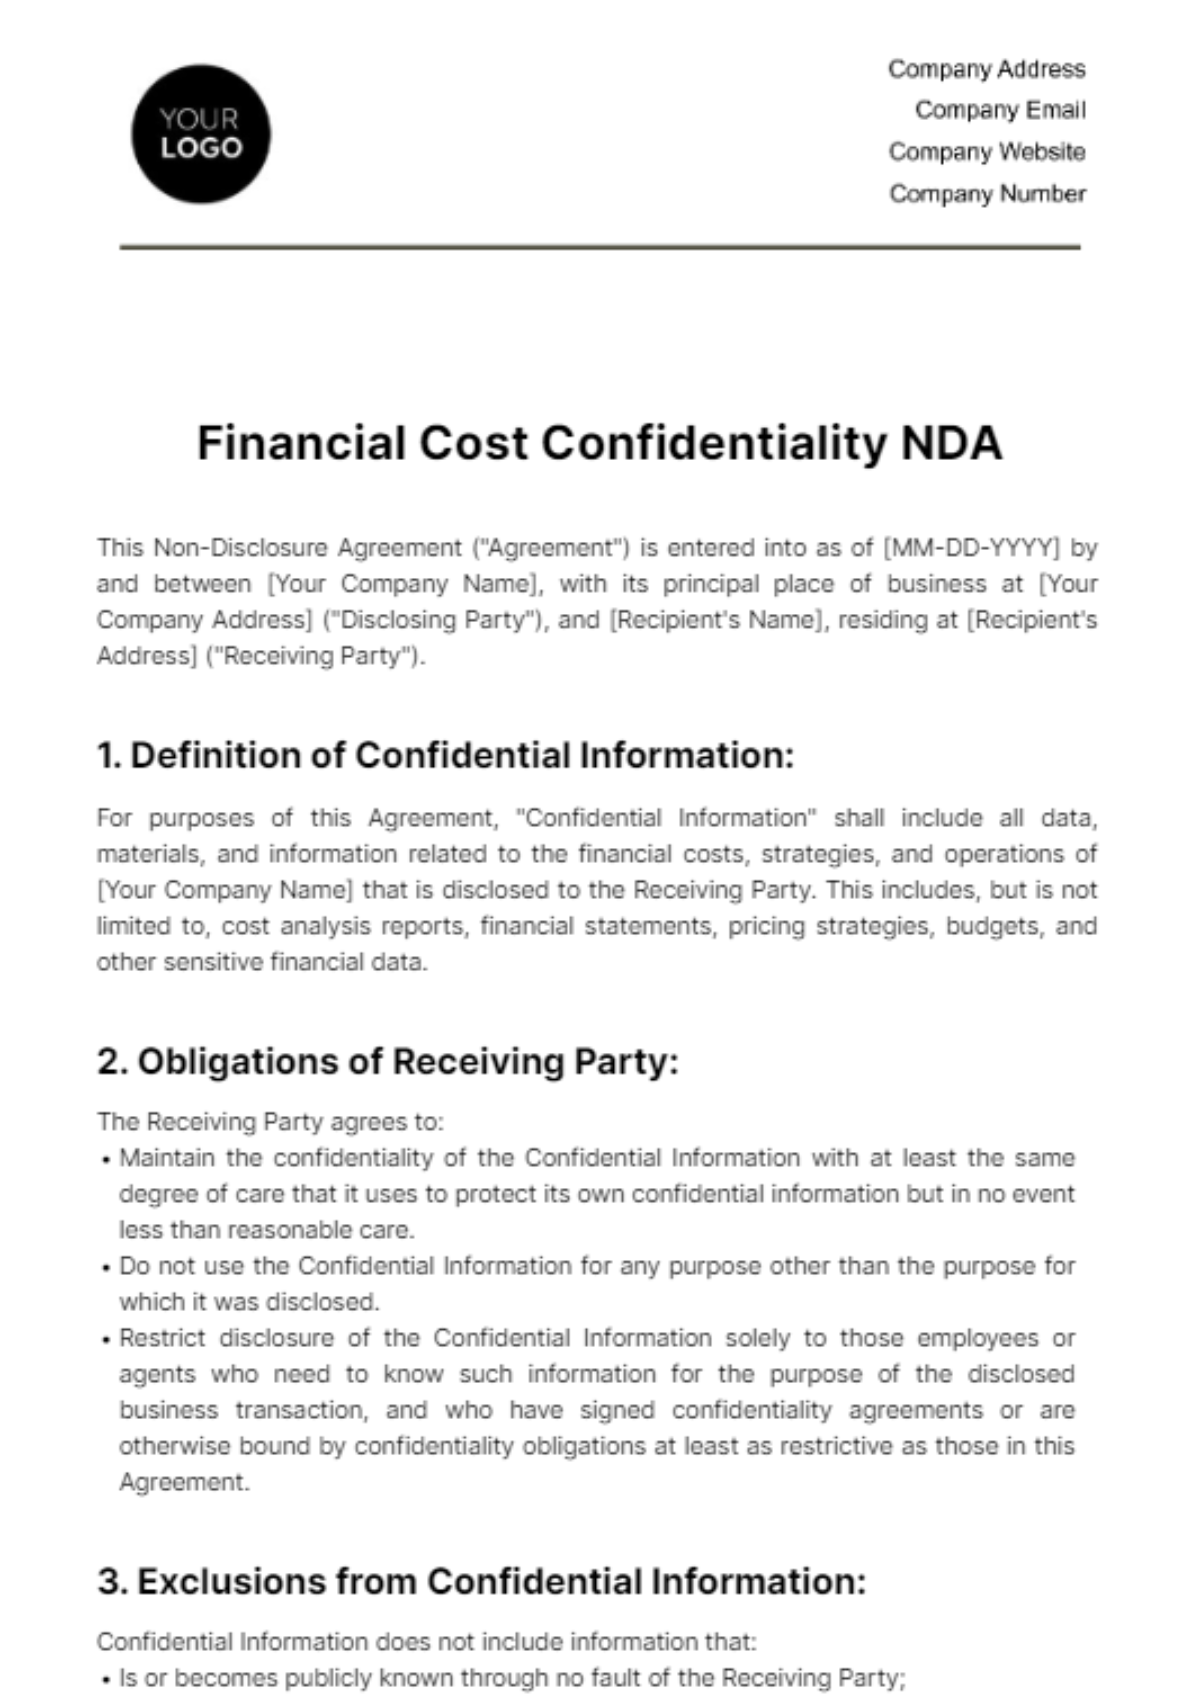 Financial Cost Confidentiality NDA Template